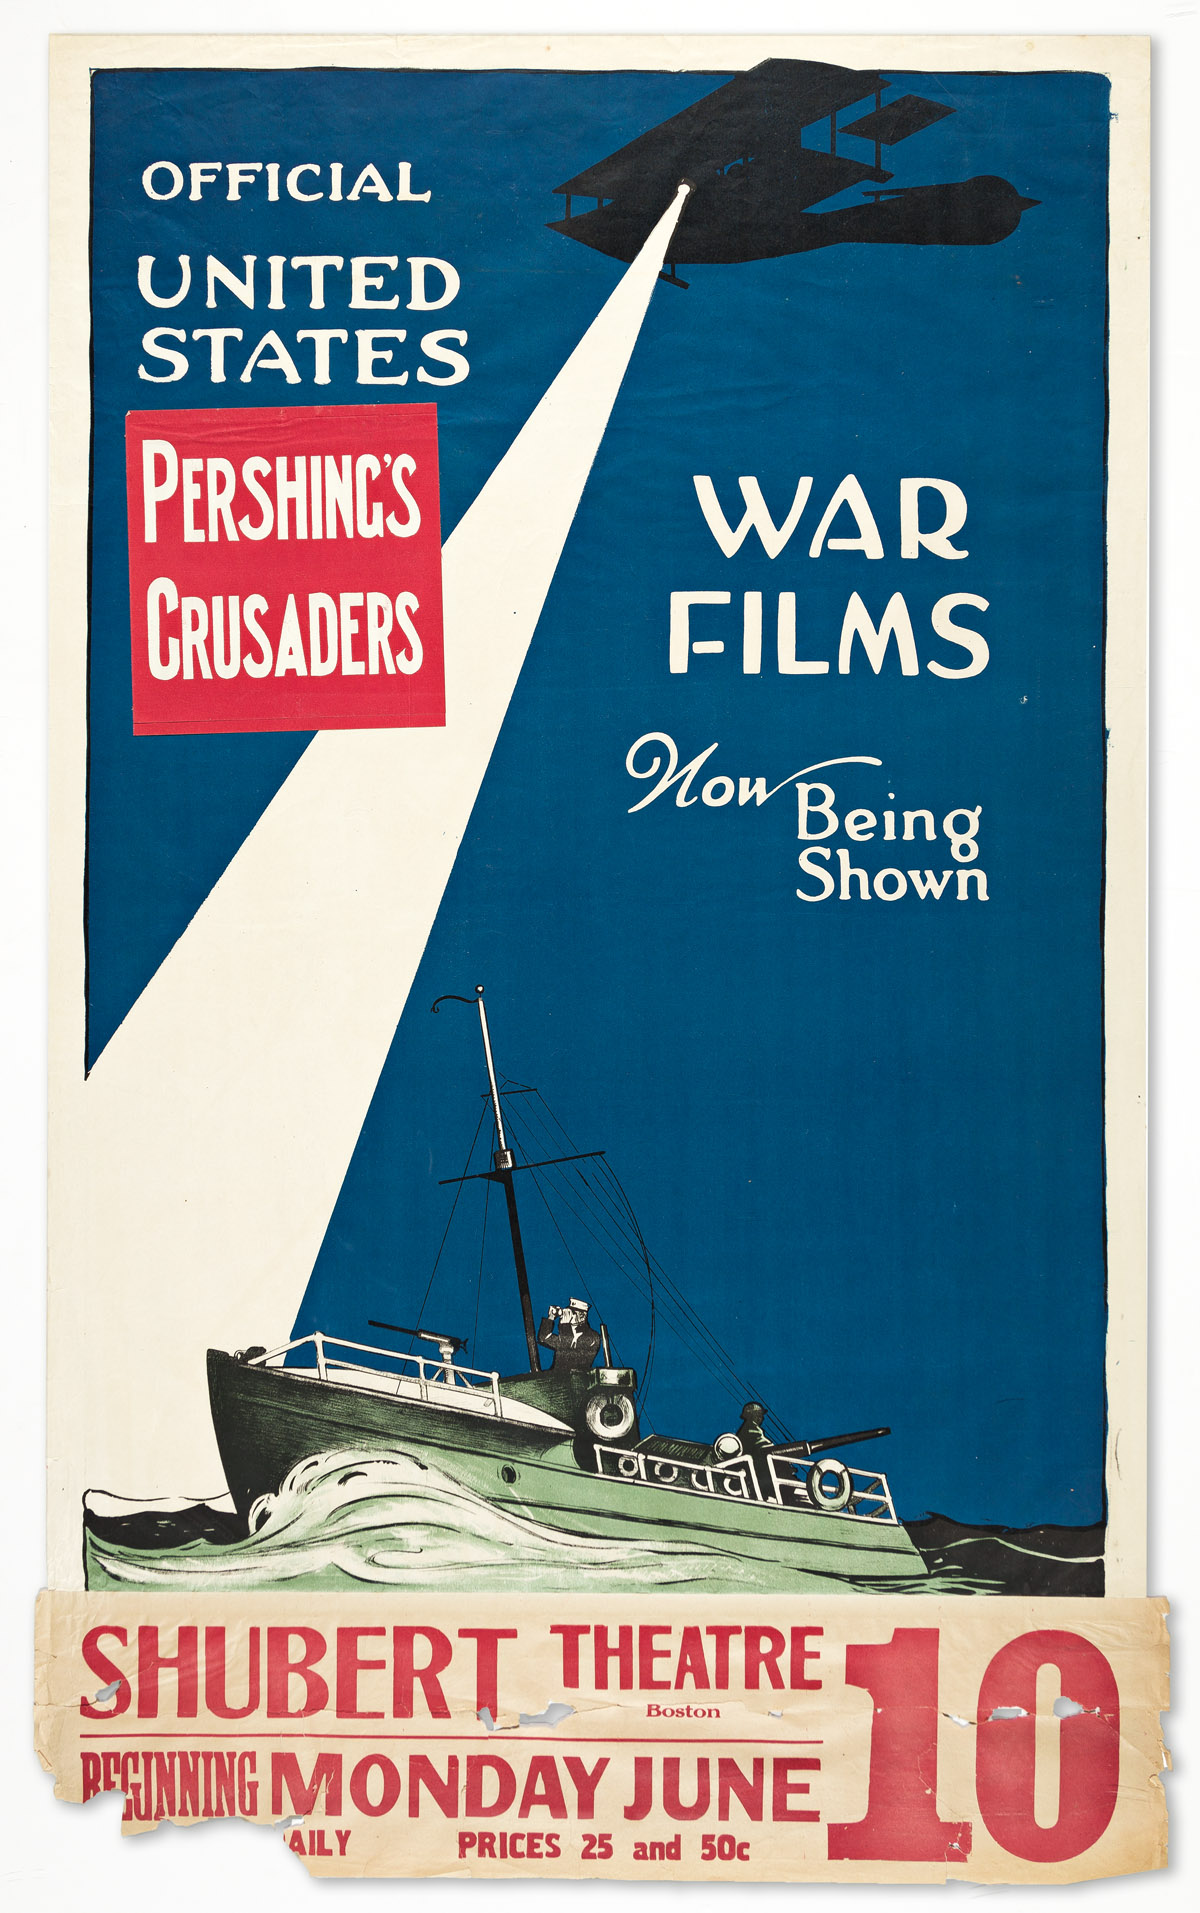 HORACE DEVITT WELSH (1888-1942).  PERSHINGS CRUSADERS / OFFICIAL UNITED STATES WAR FILMS. 1917. 43x28 inches, 109¼x71 cm. The Hegeman